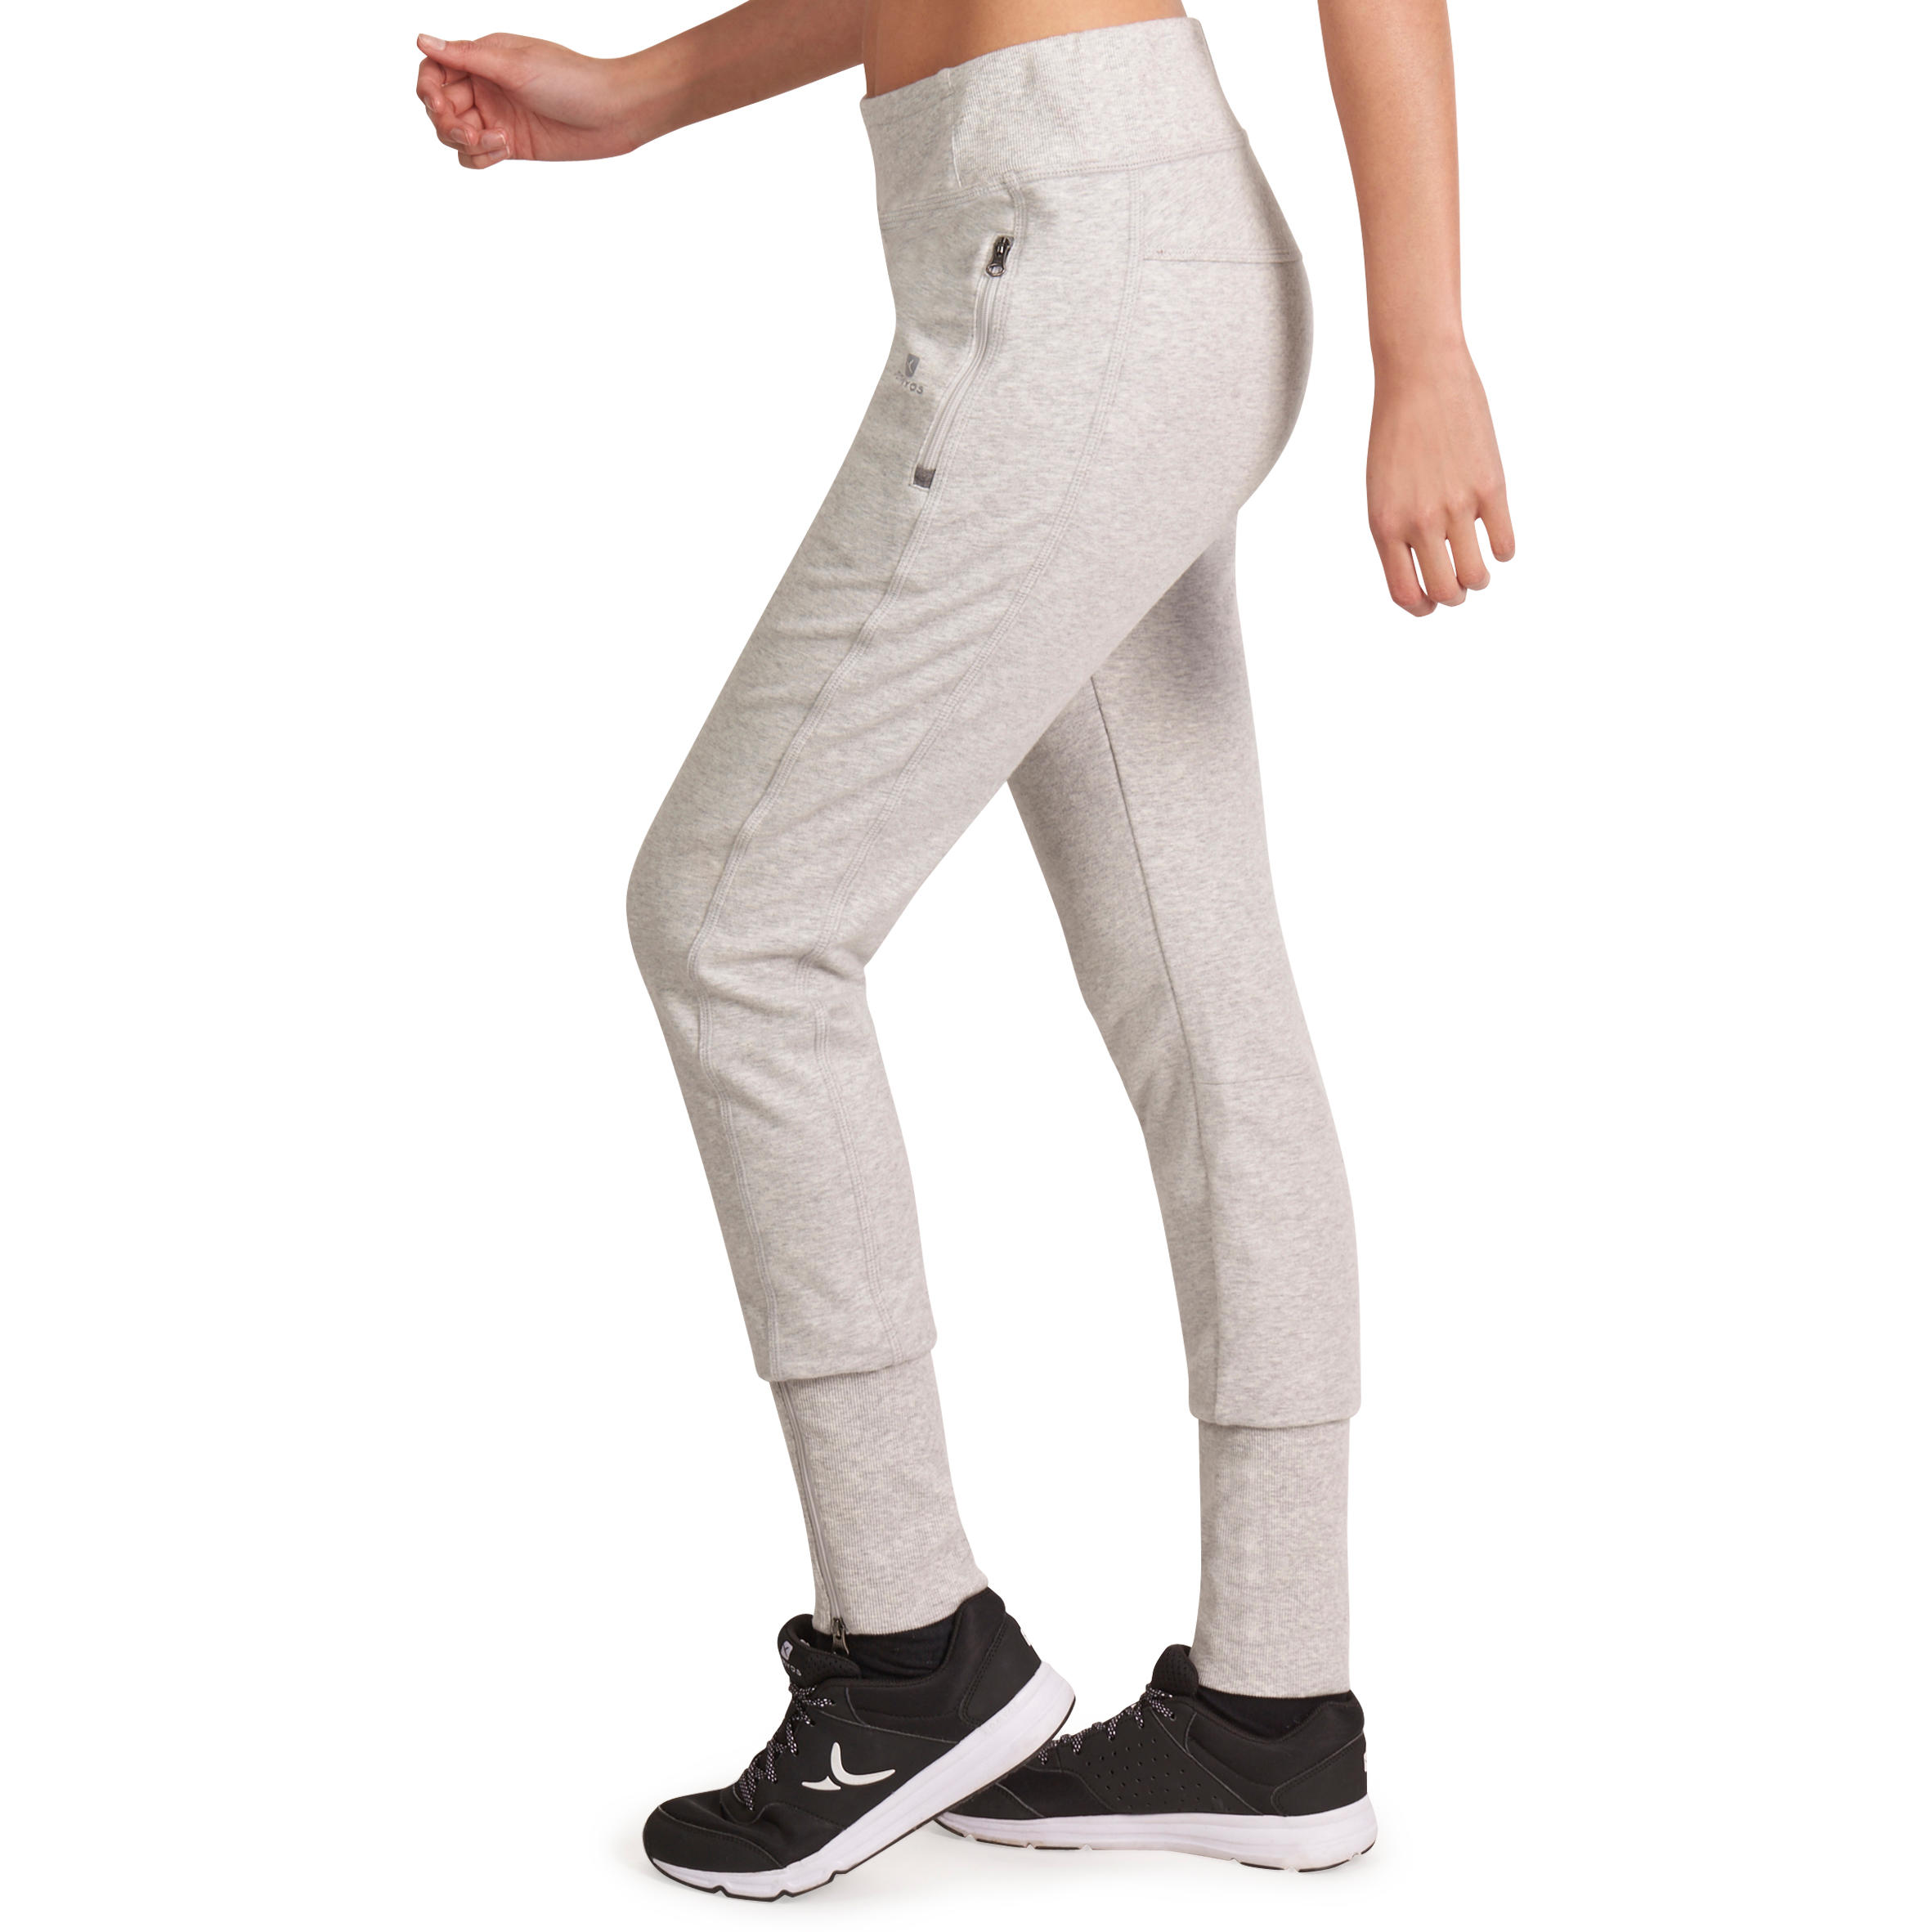 920 Women's Slim-Fit Gym & Pilates Bottoms with Zip Ankles - Light Mottled Grey 5/14